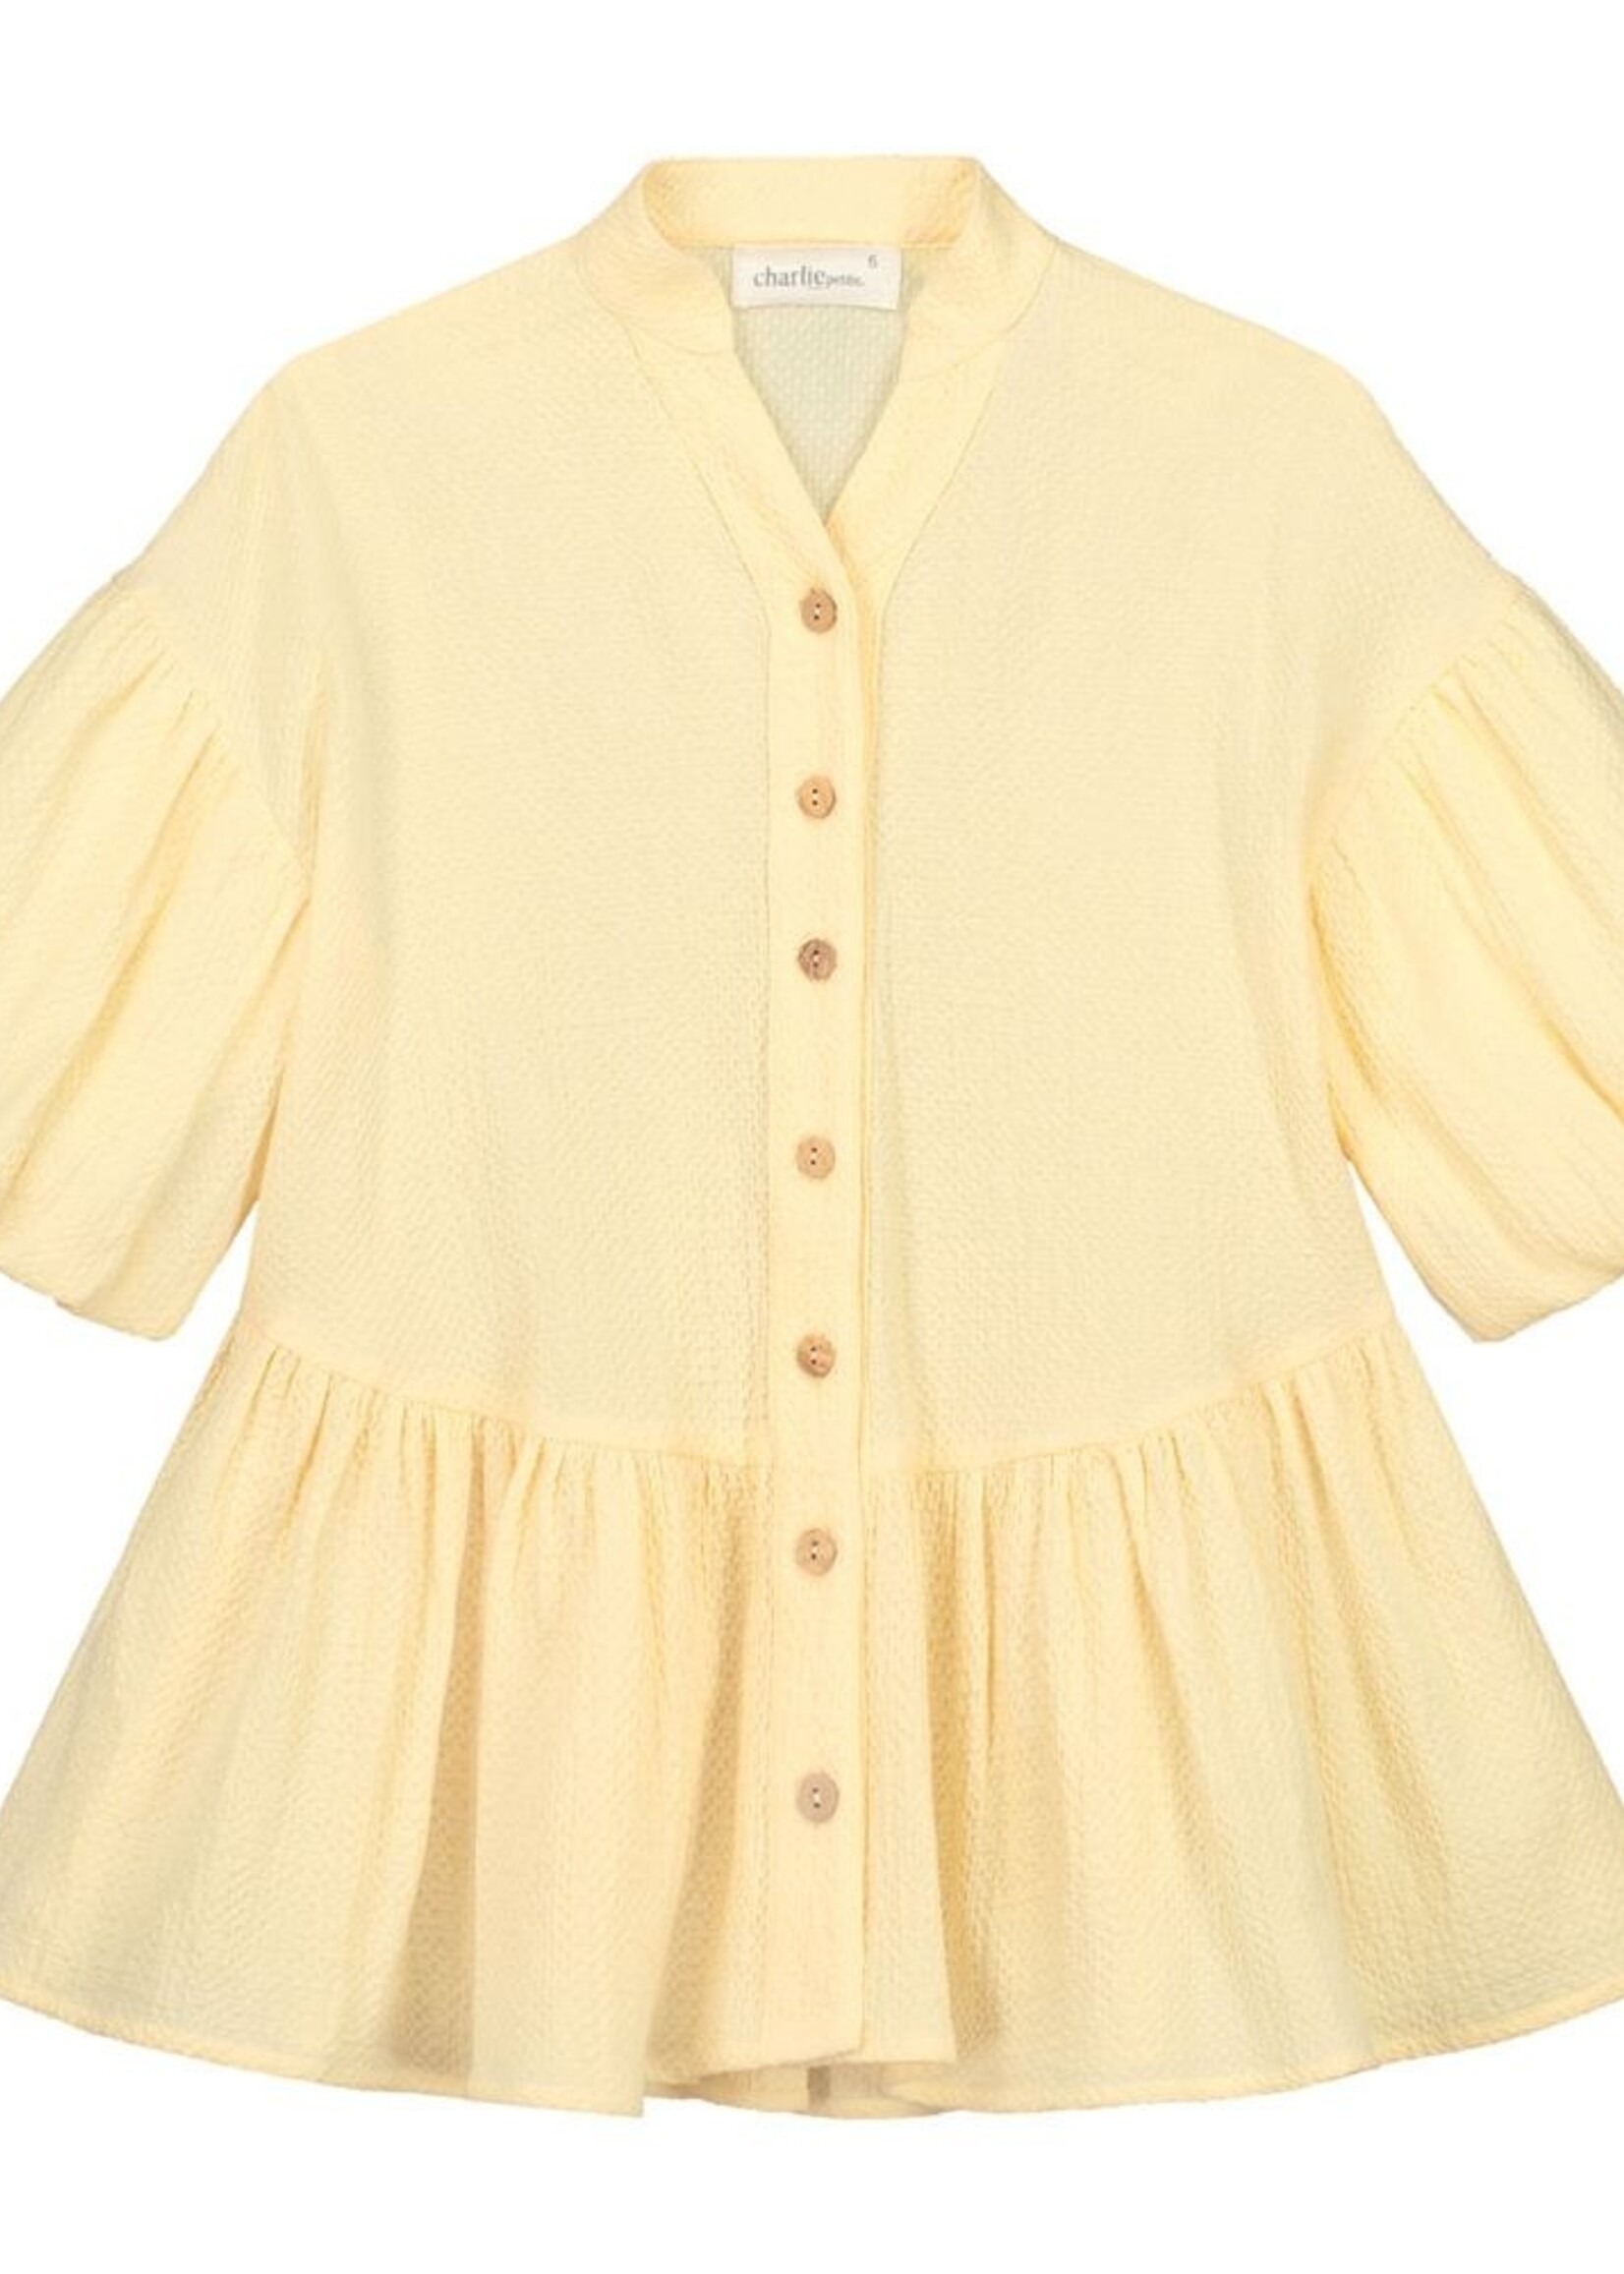 Charlie Petite Isabelle dress Yellow - Charlie Petite